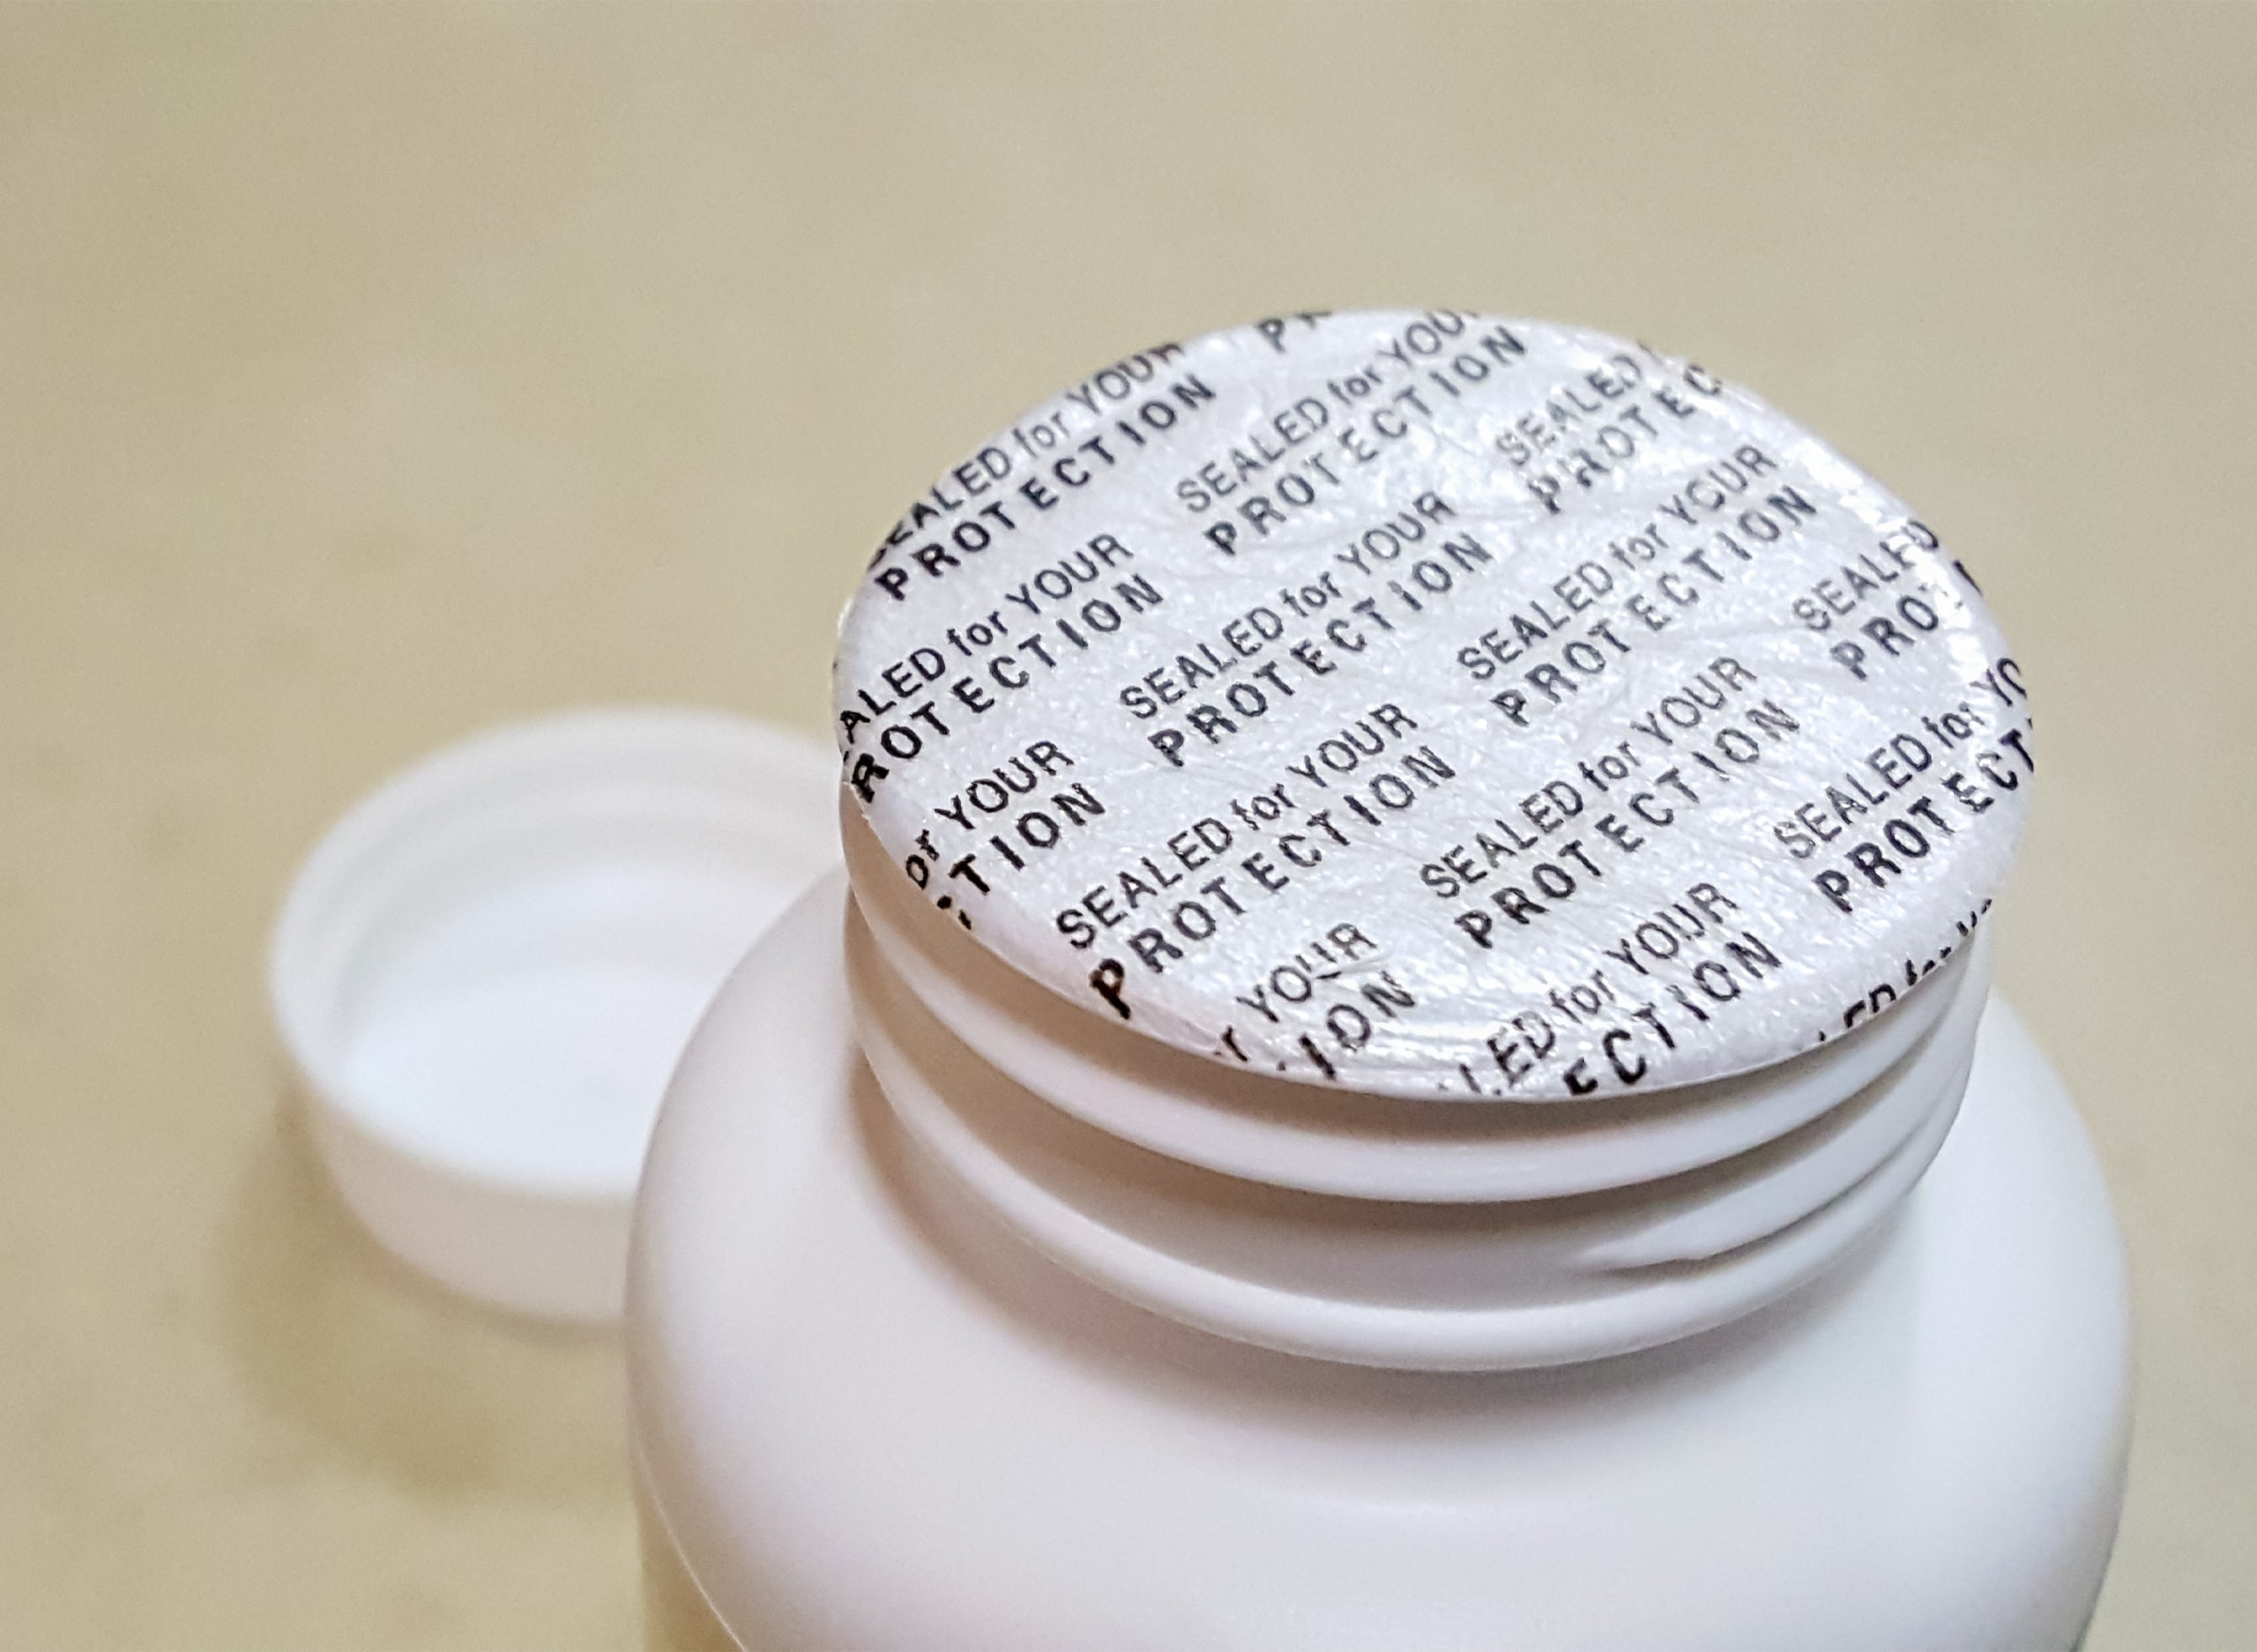 What Is Tamper Evident Packaging?